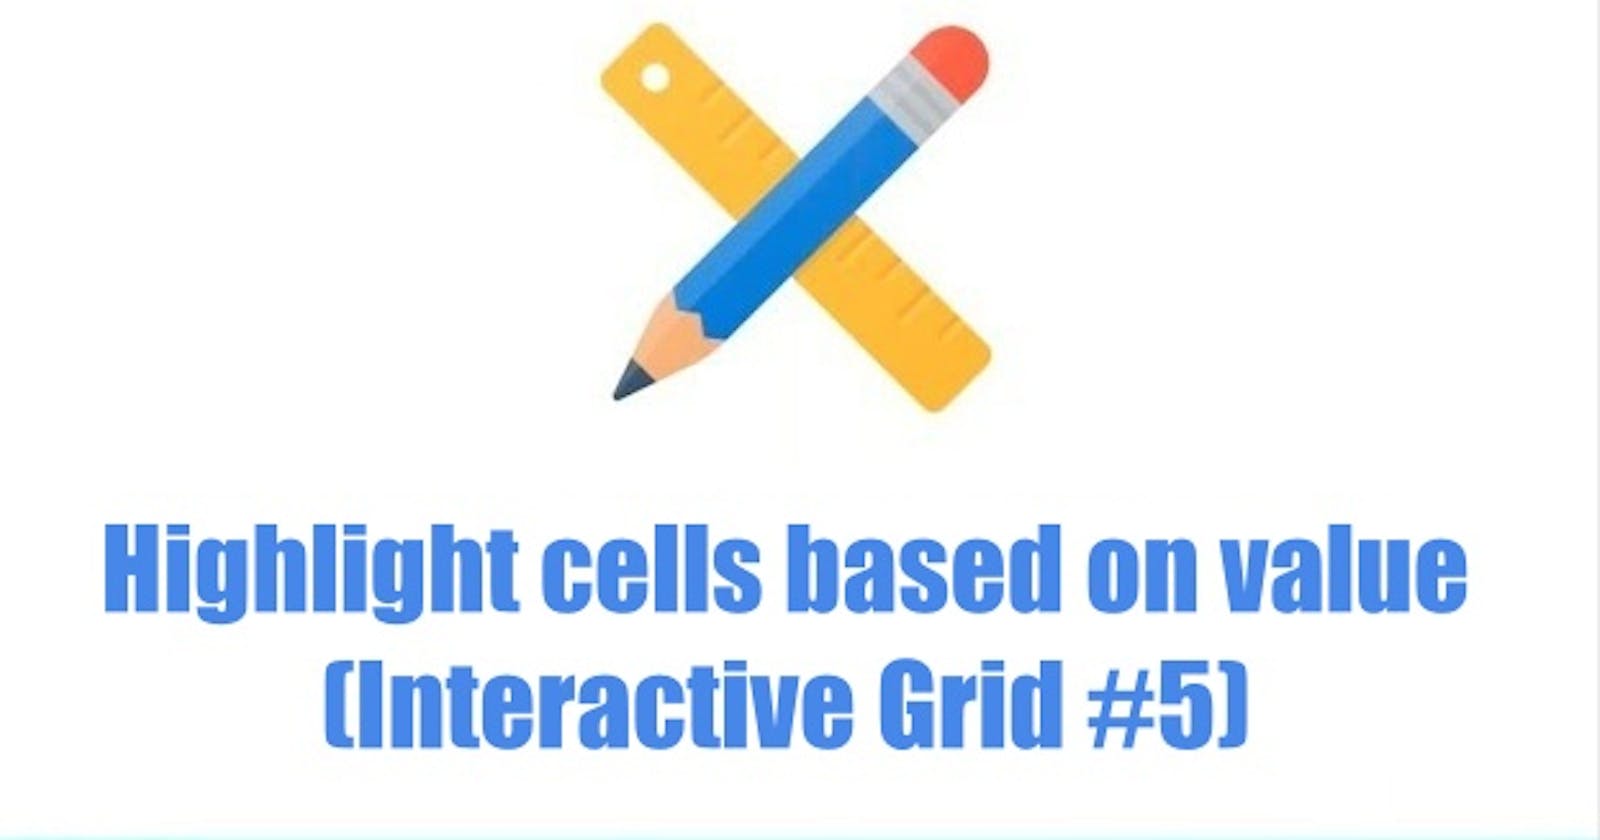 Highlight cells based on value (Interactive Grid #5)